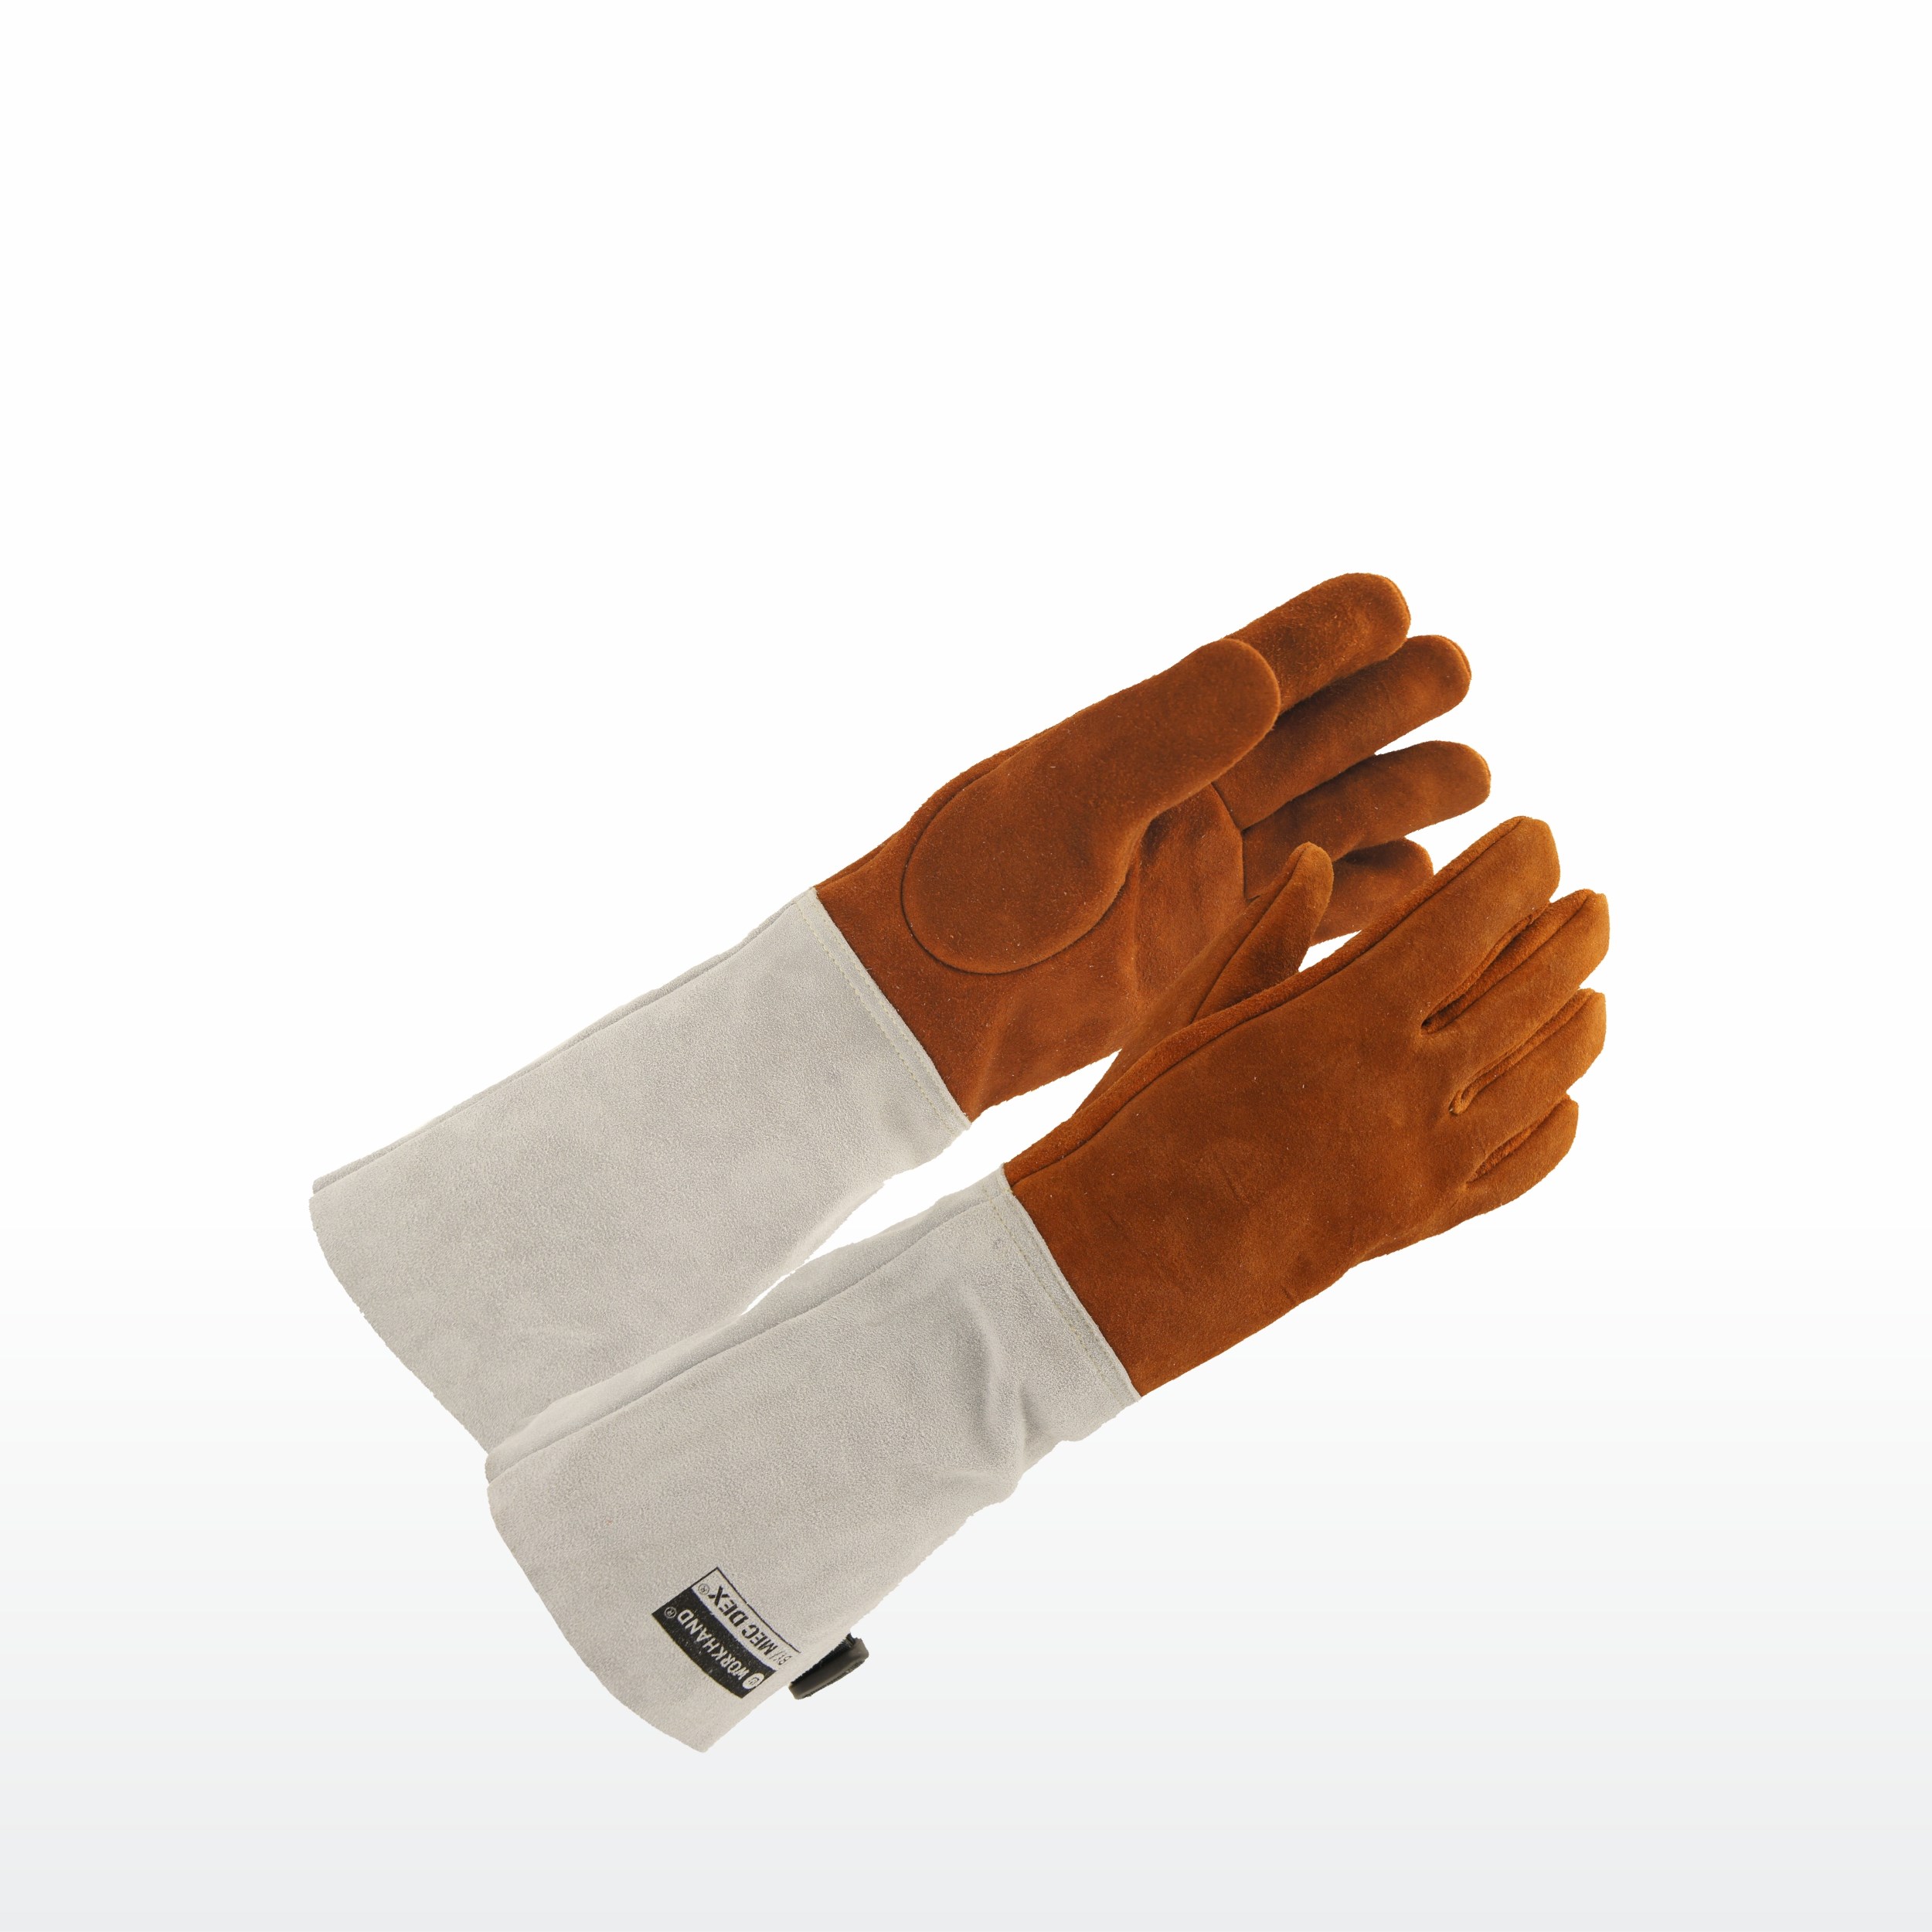 Workhand® by Mec Dex®  HP-714